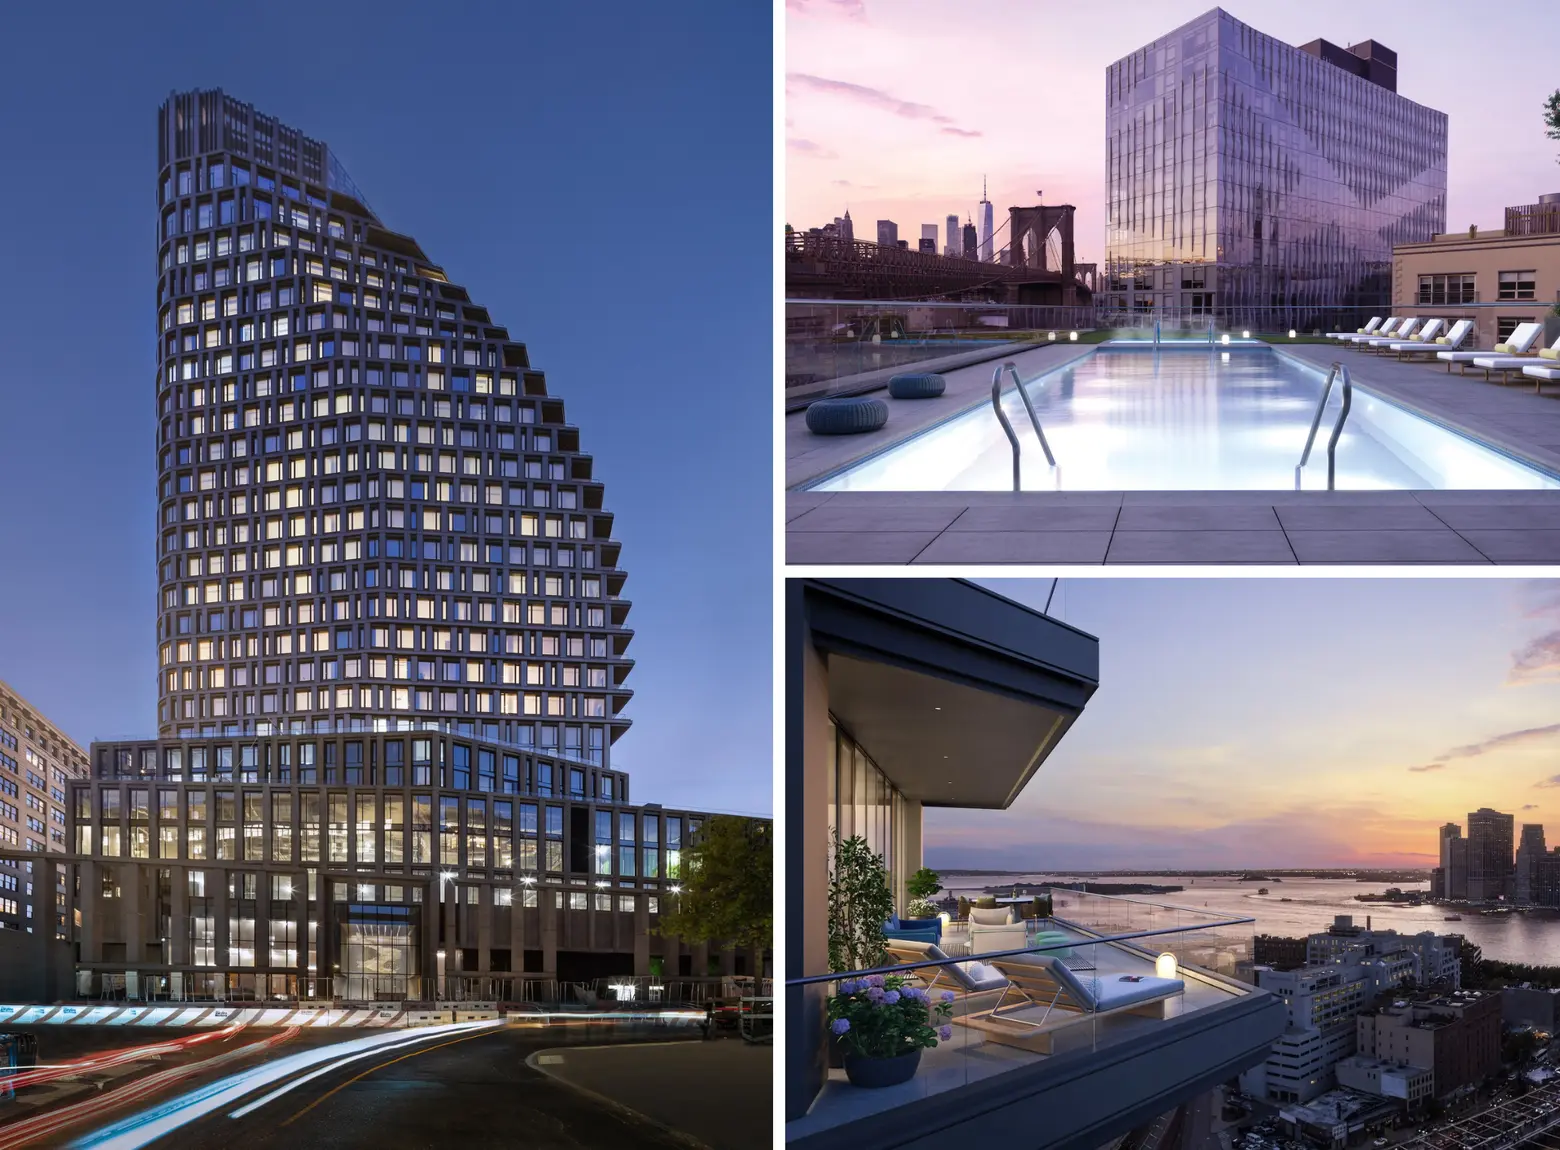 Announcing 6sqft’s 2022 Building of the Year!